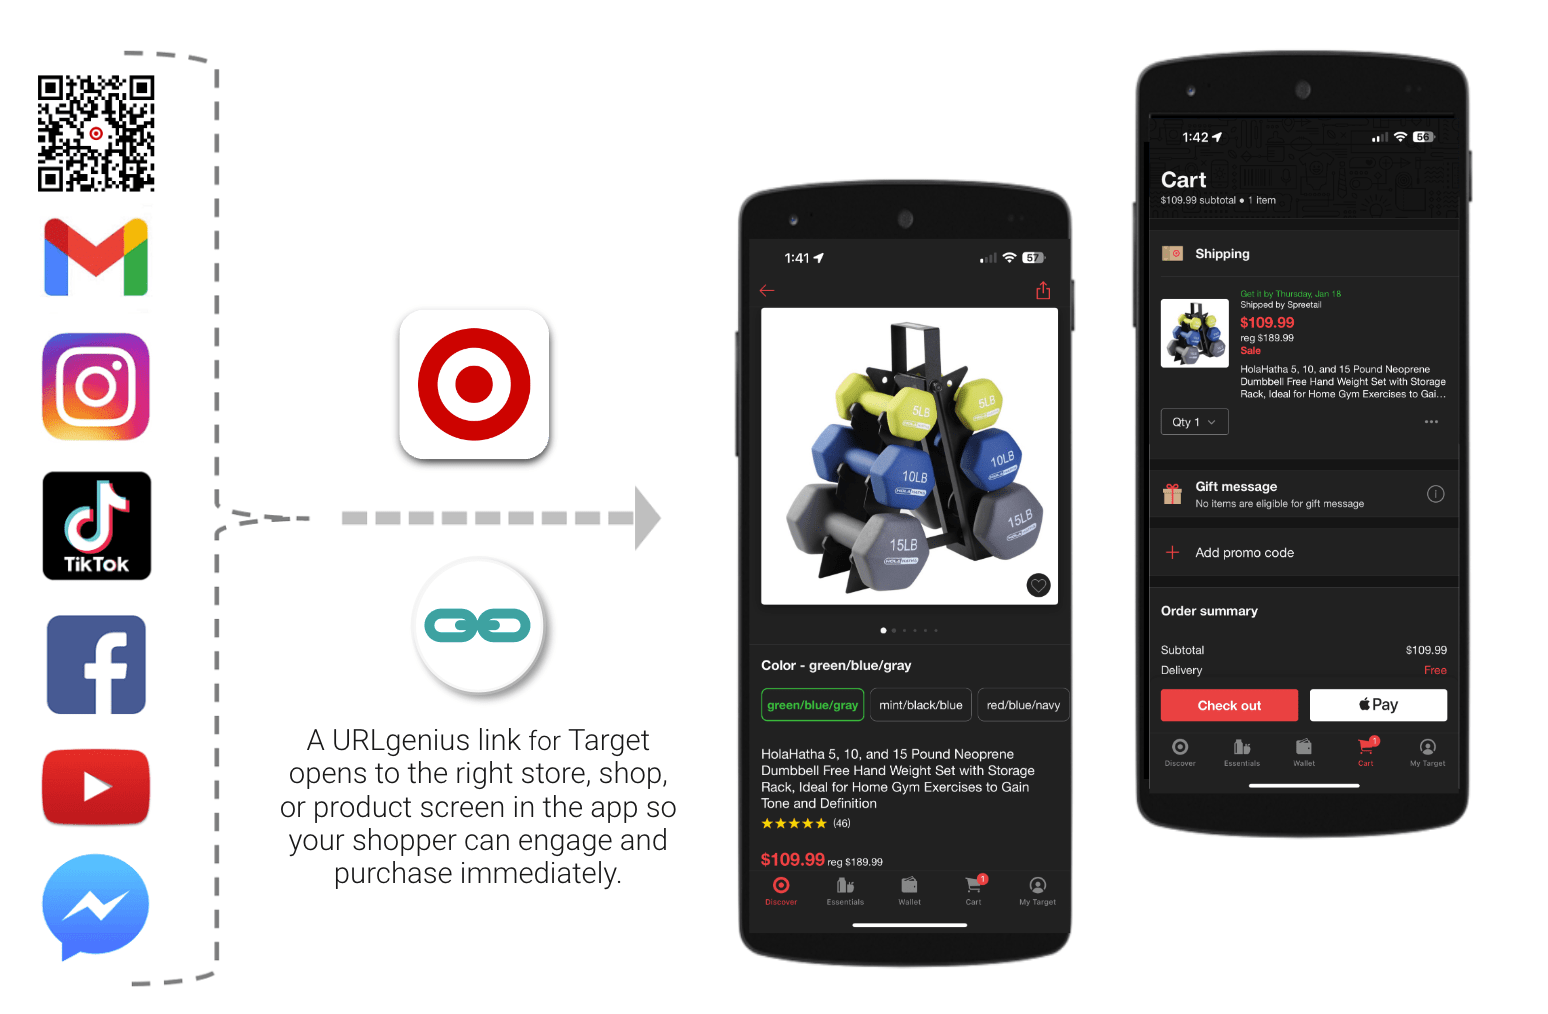 A URLgenius link for Target opens to the right store or product screen in the app so your shopper can engage and purchase immediately 